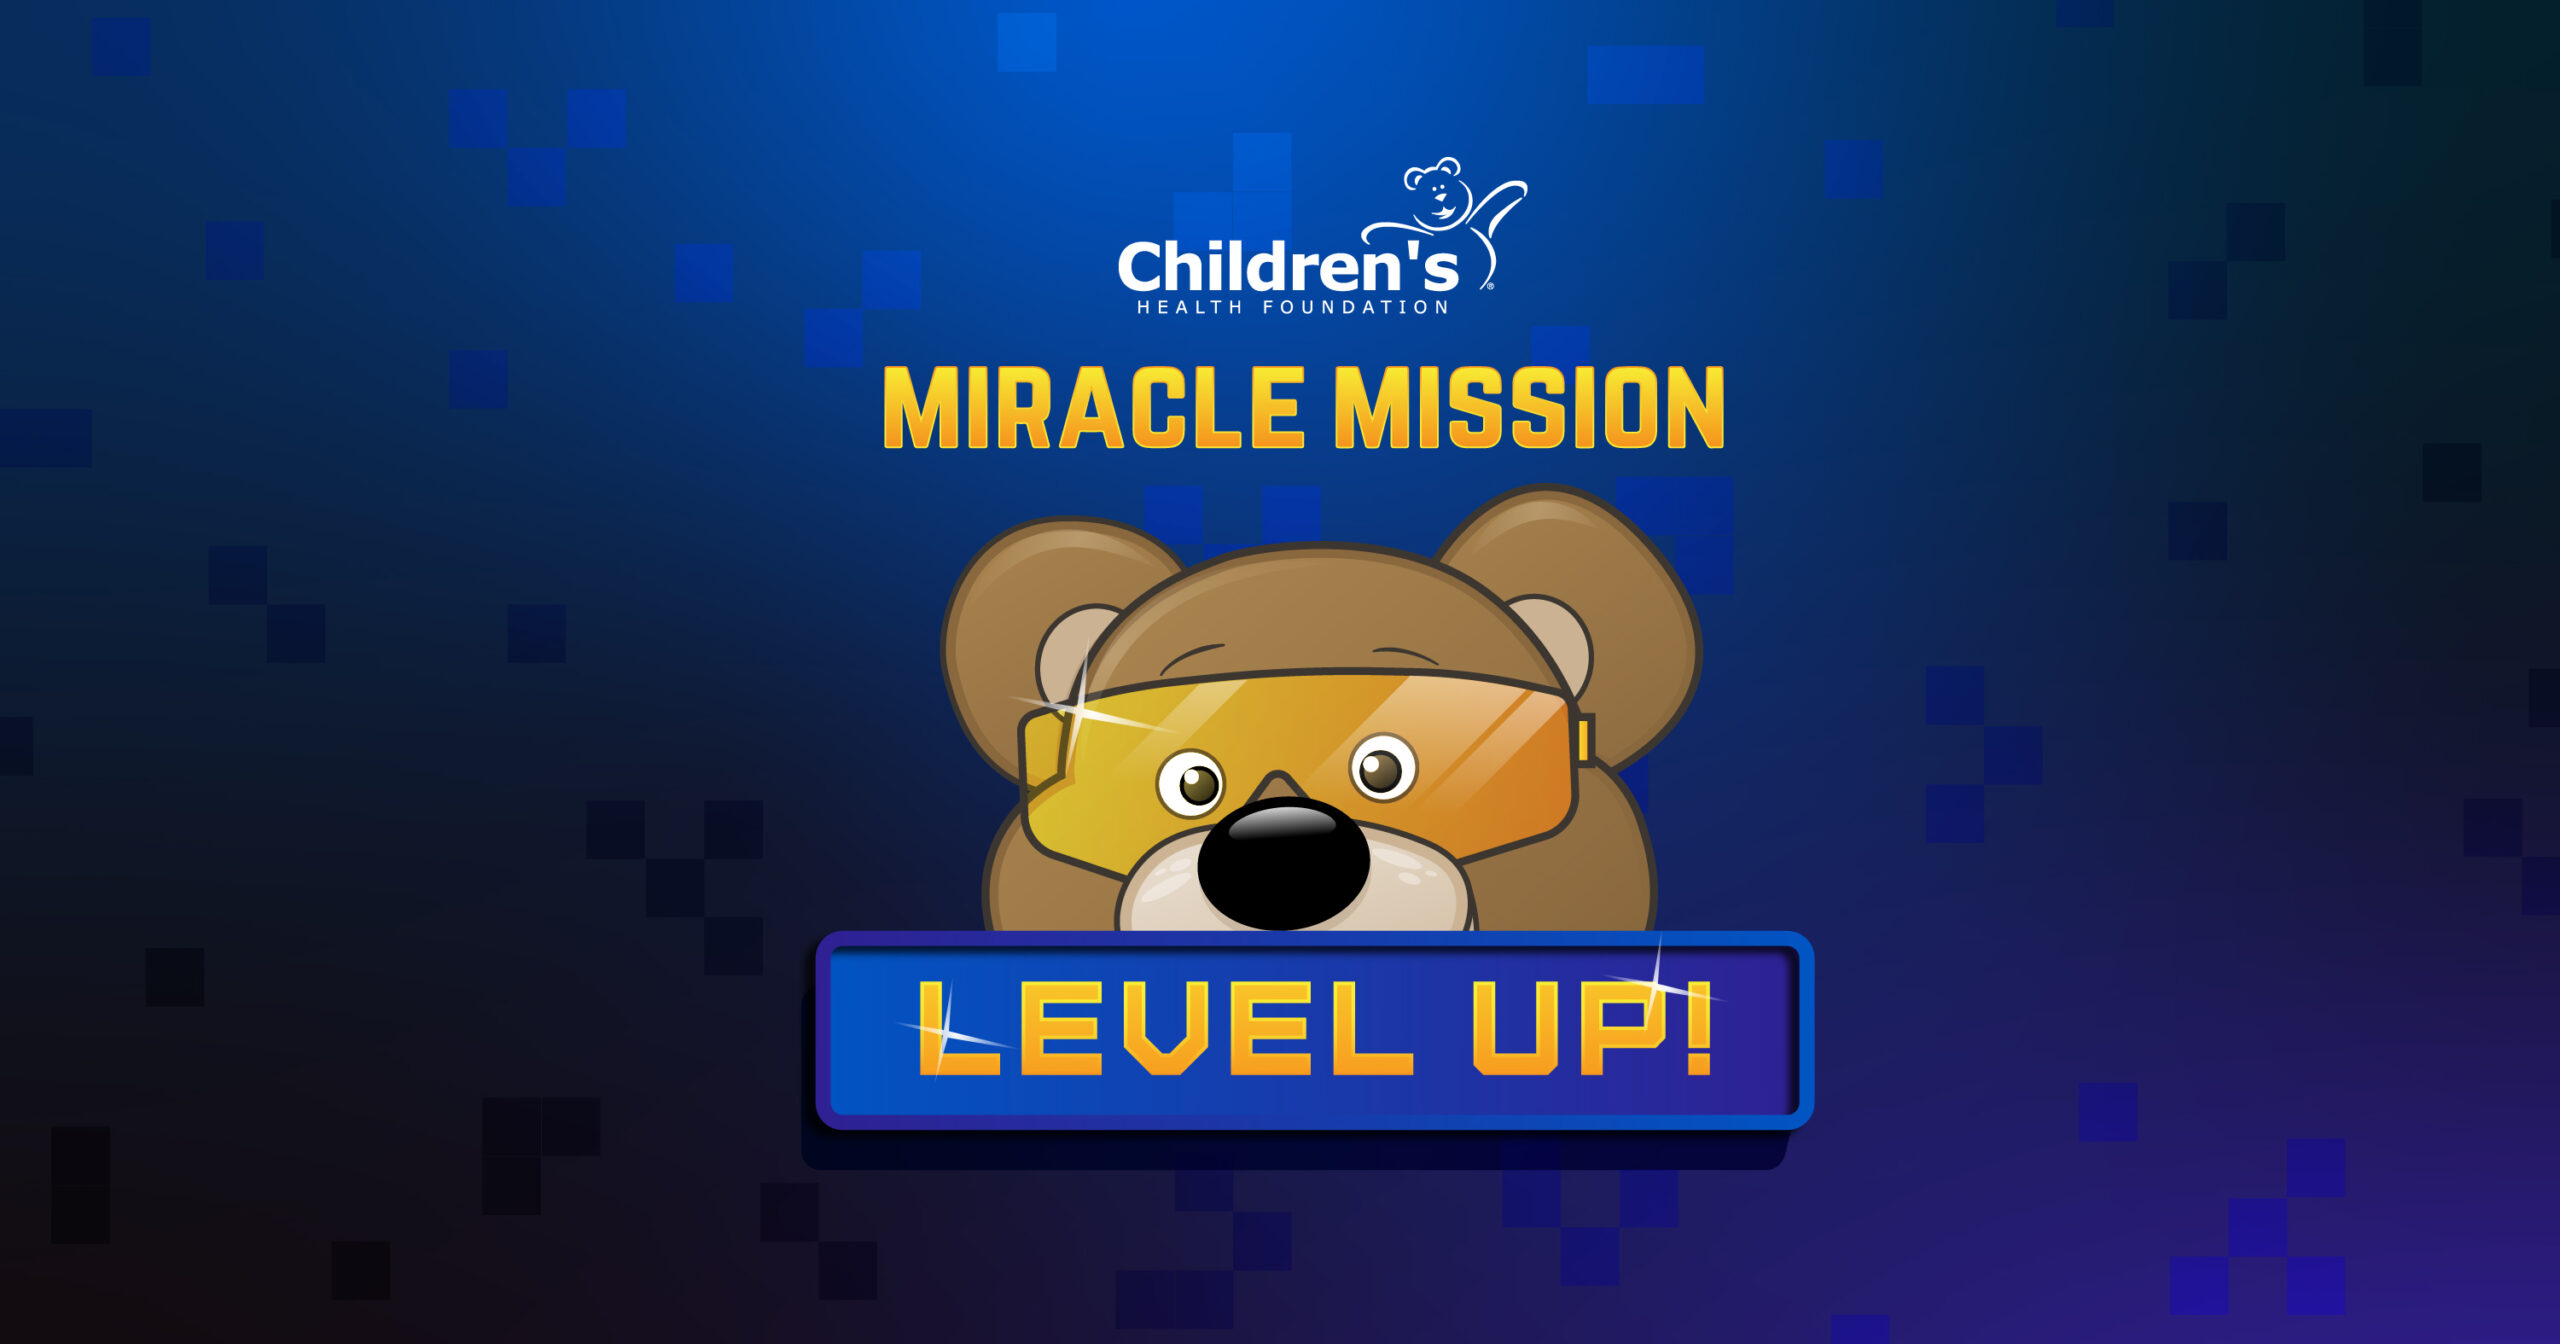 Join Miracle Mission to take back kids' health